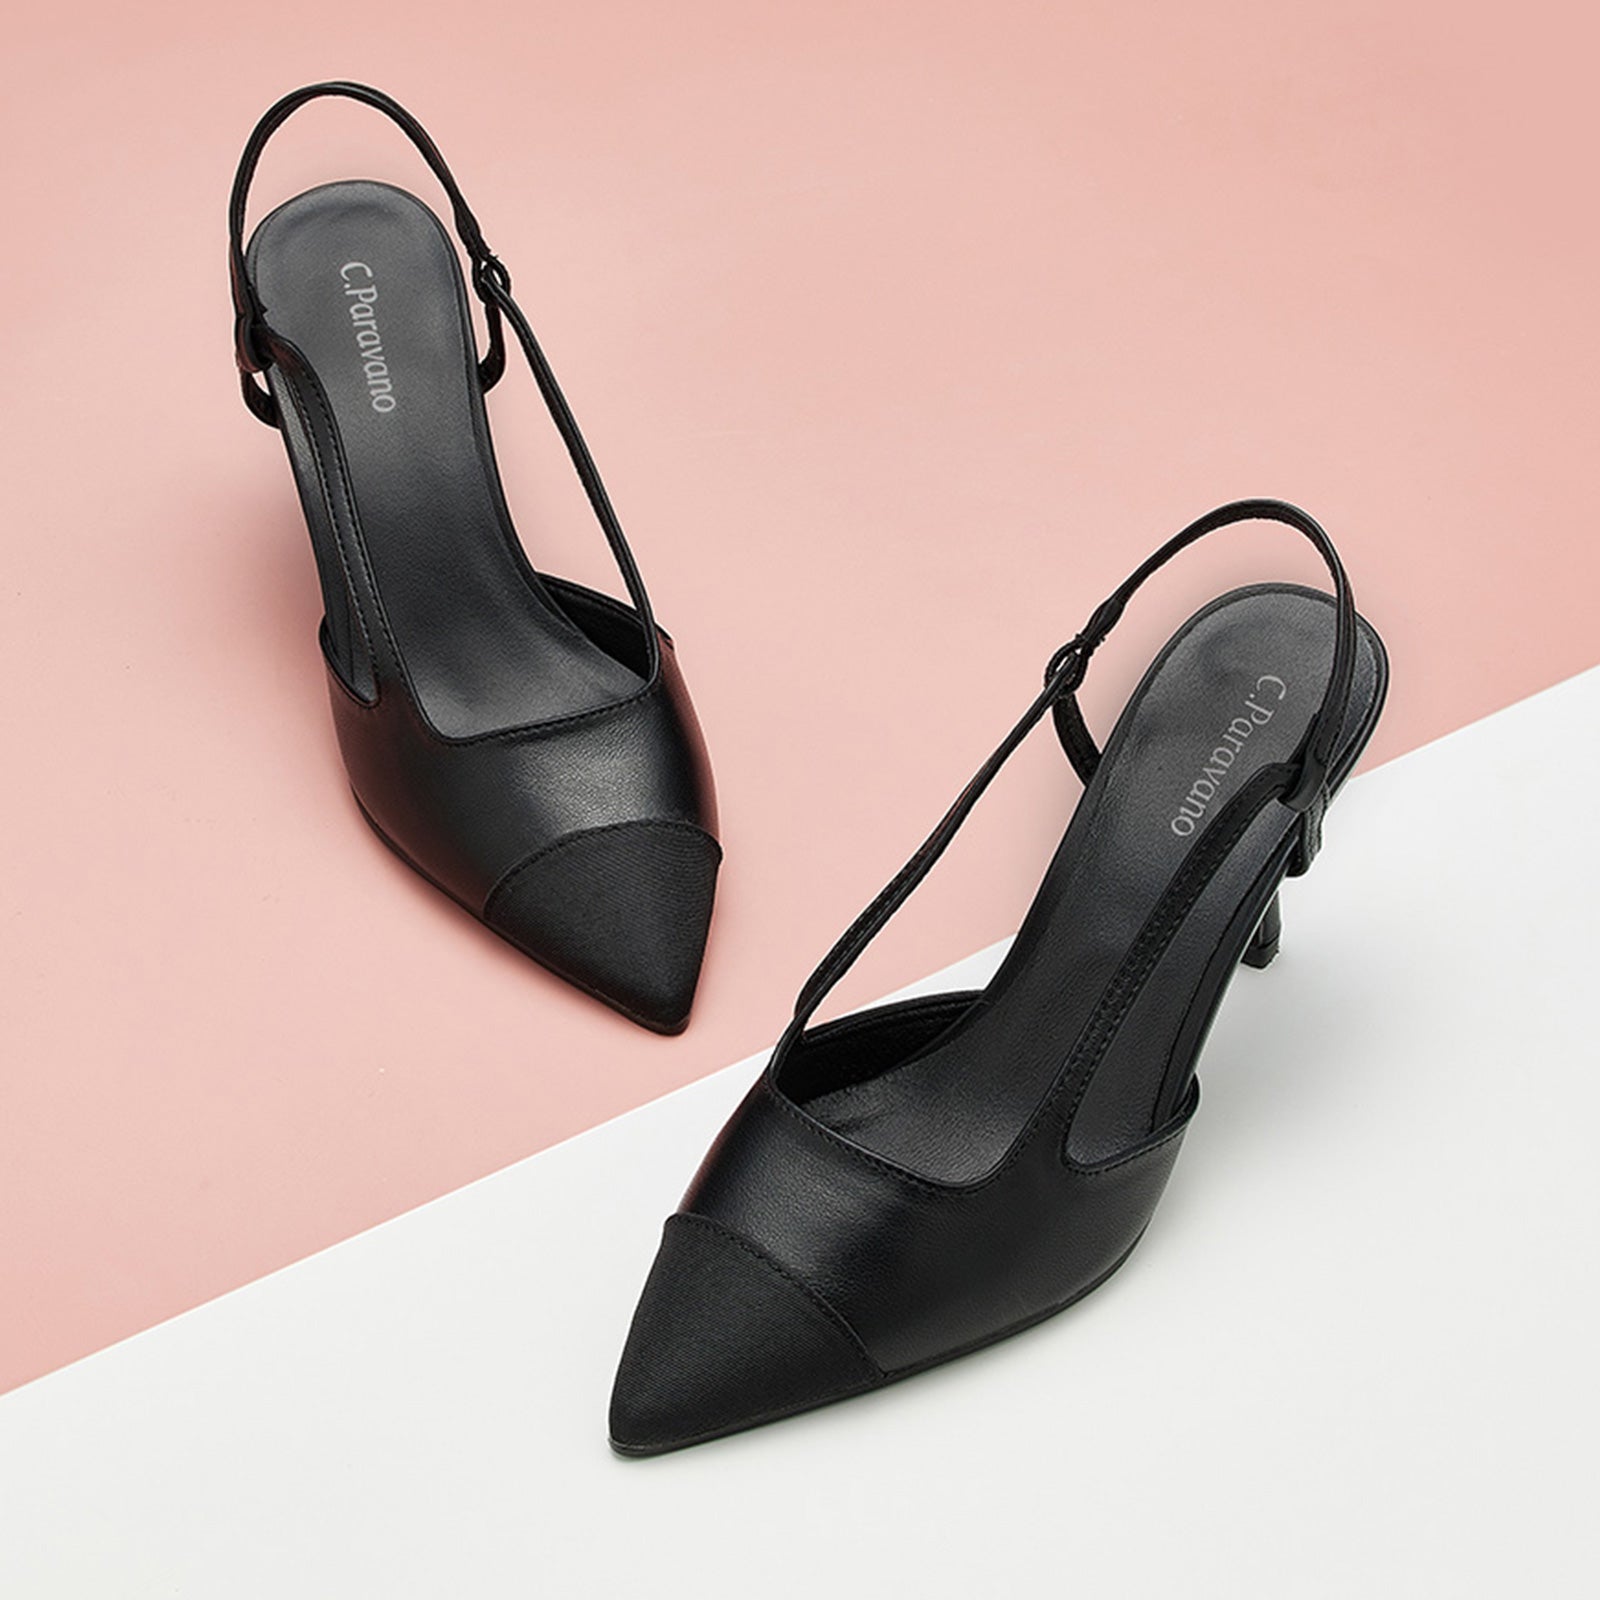 Black Pointed Toe Pumps with a slingback, perfect for a confident and fashionable look in any urban setting.